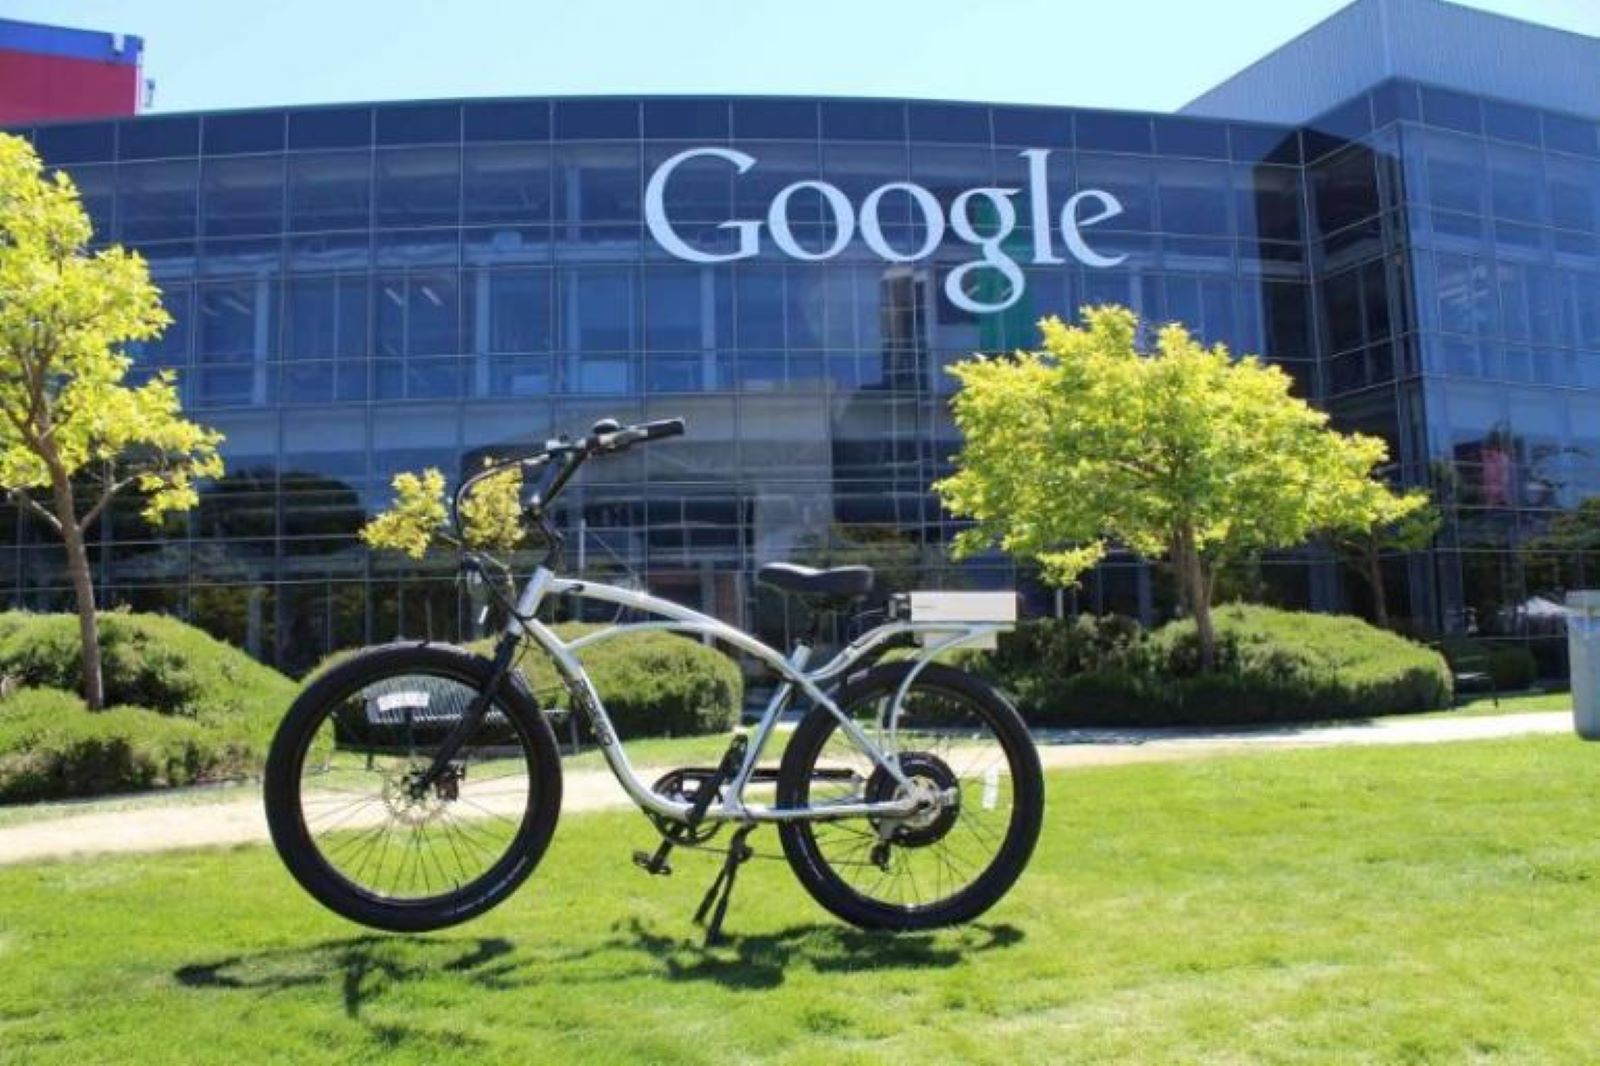 A bicycle on a green lawn in front of a Google building.